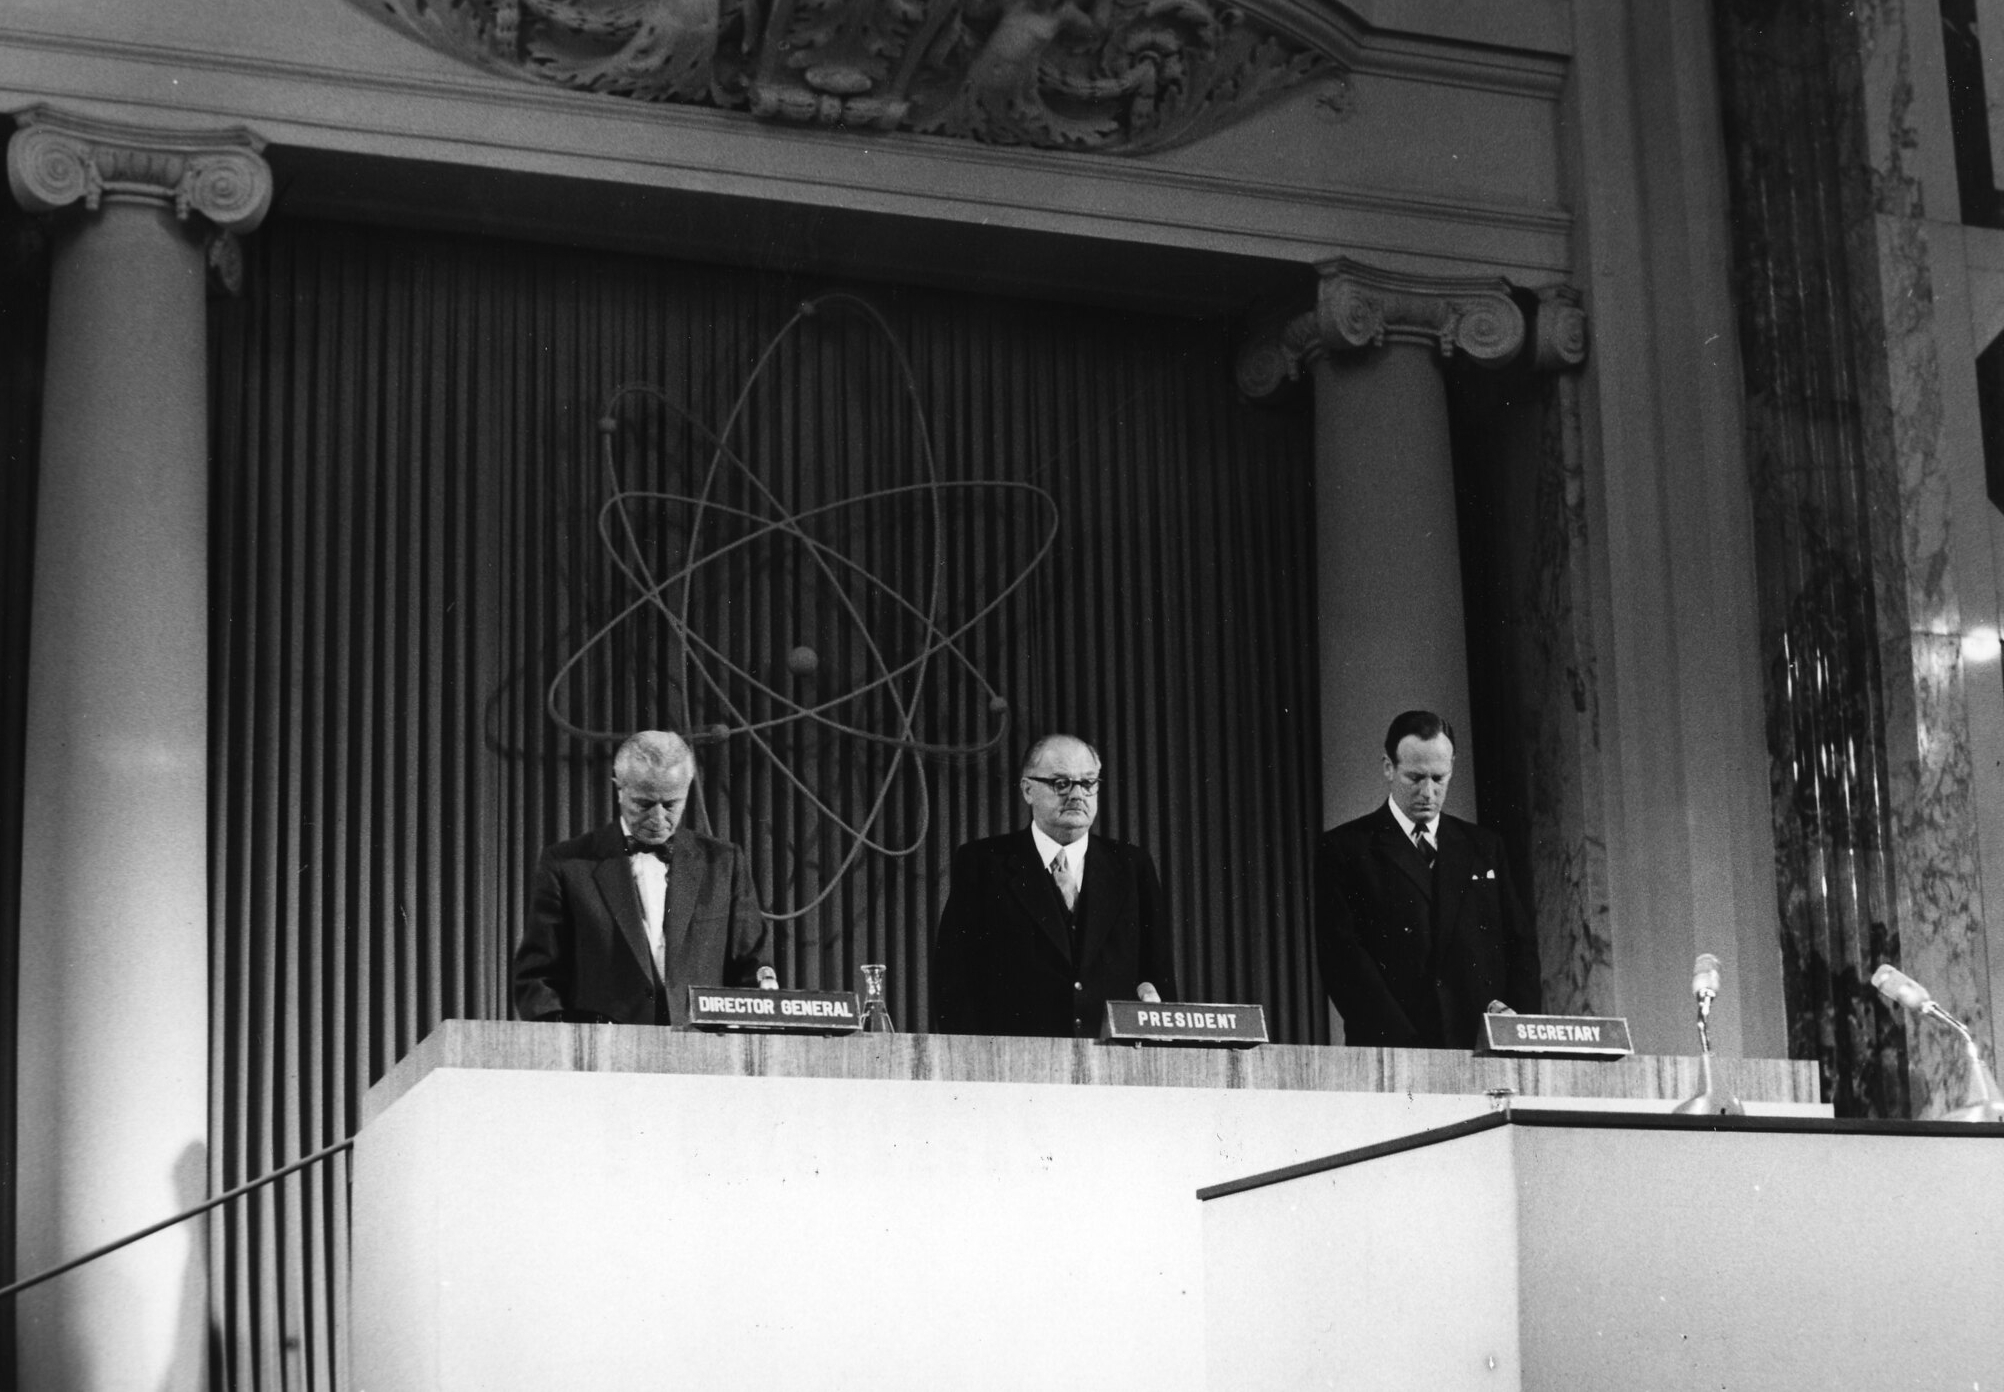 A minute of silence at the opening session of the second Annual General conference of the IAEA at Hofburg, Vienna, Austria, 22 September 1958. Photo by IAEA. 